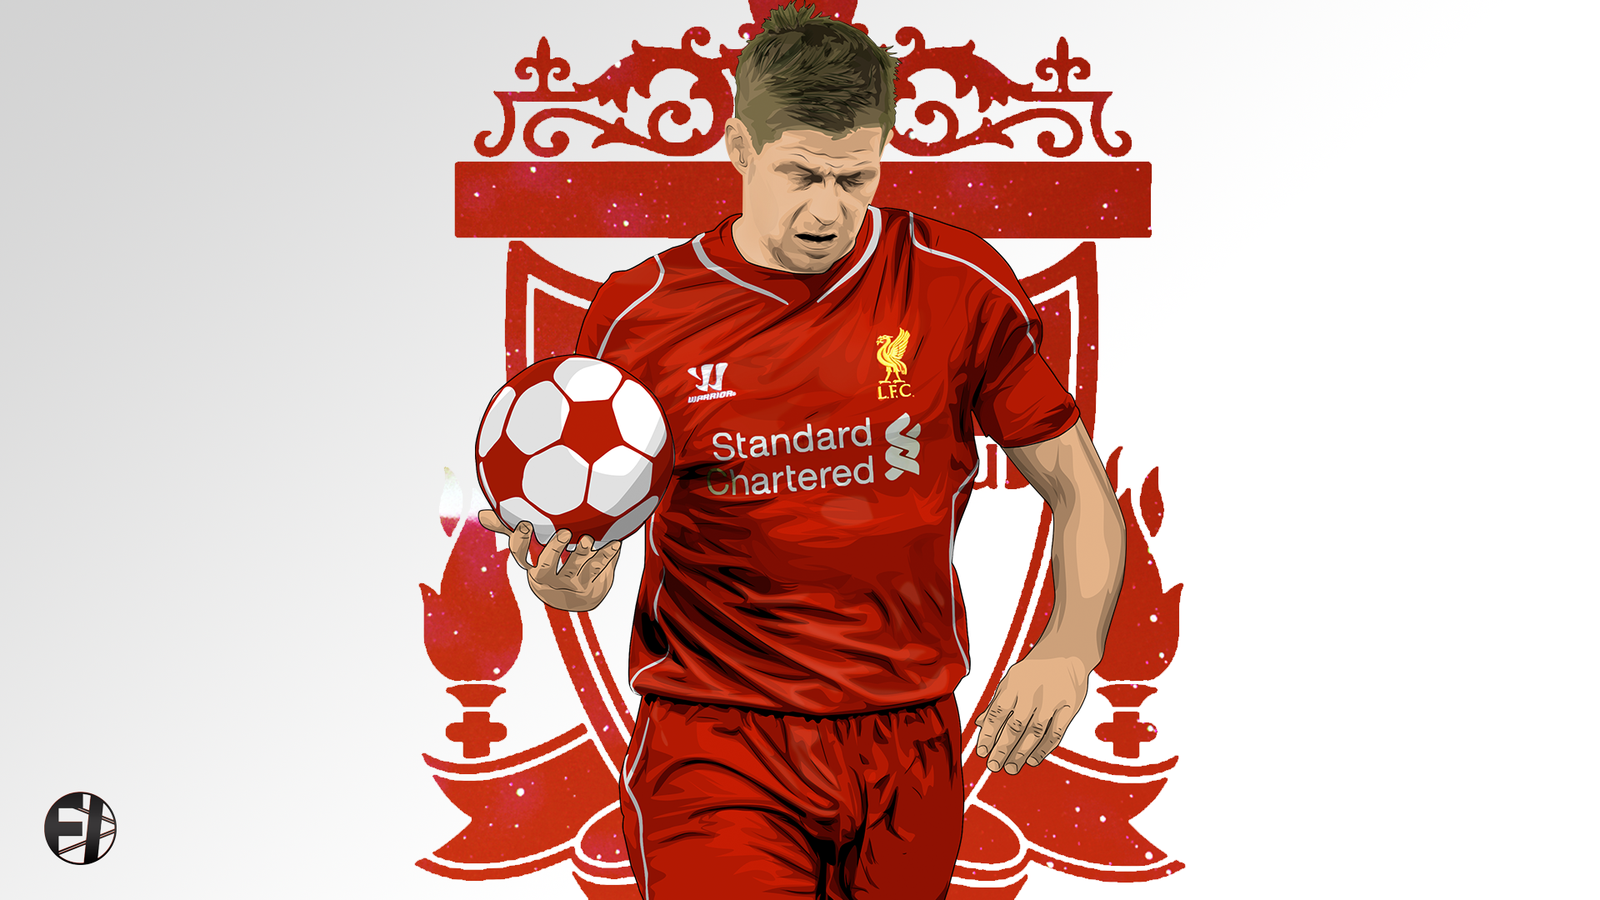 Steven Gerrard Vector By Fimgraphic